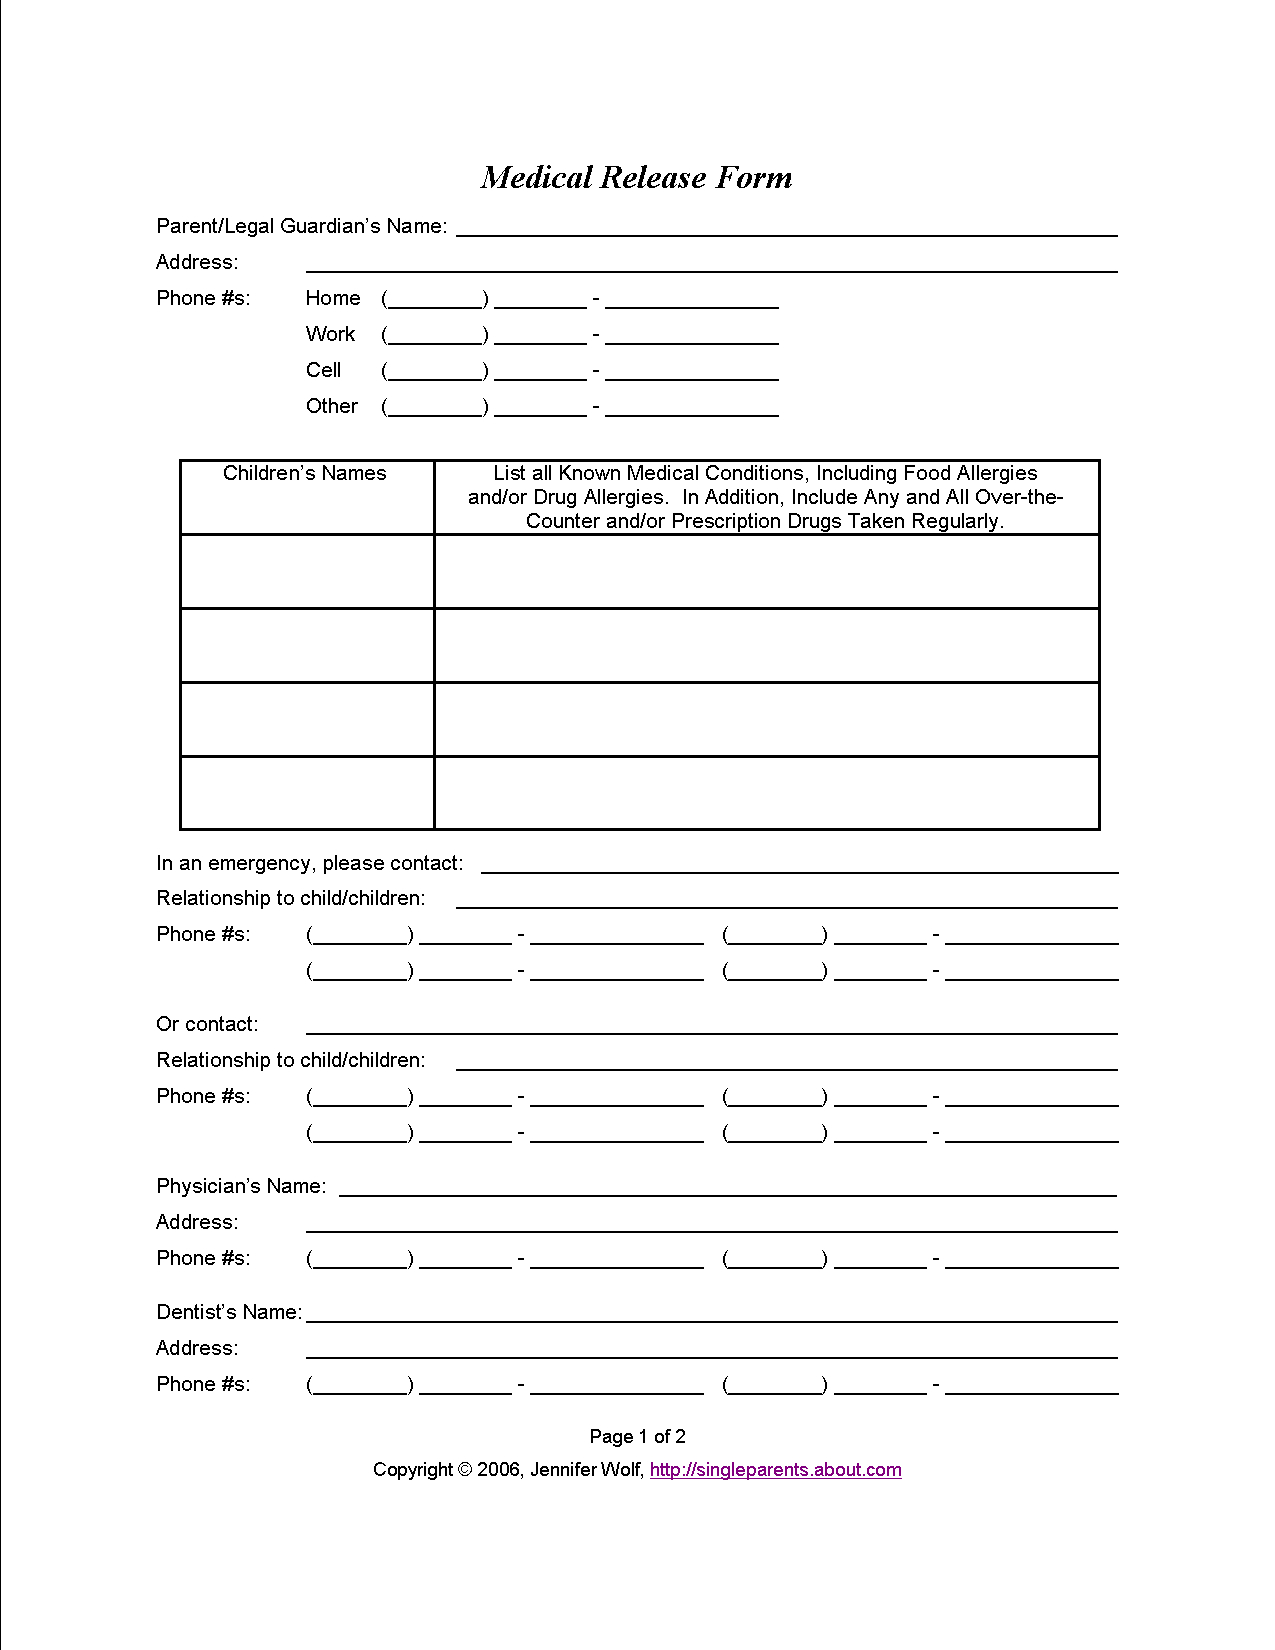 Do You Have A Medical Release Form For Your Kids? | Travel | Consent - Free Printable Caregiver Forms